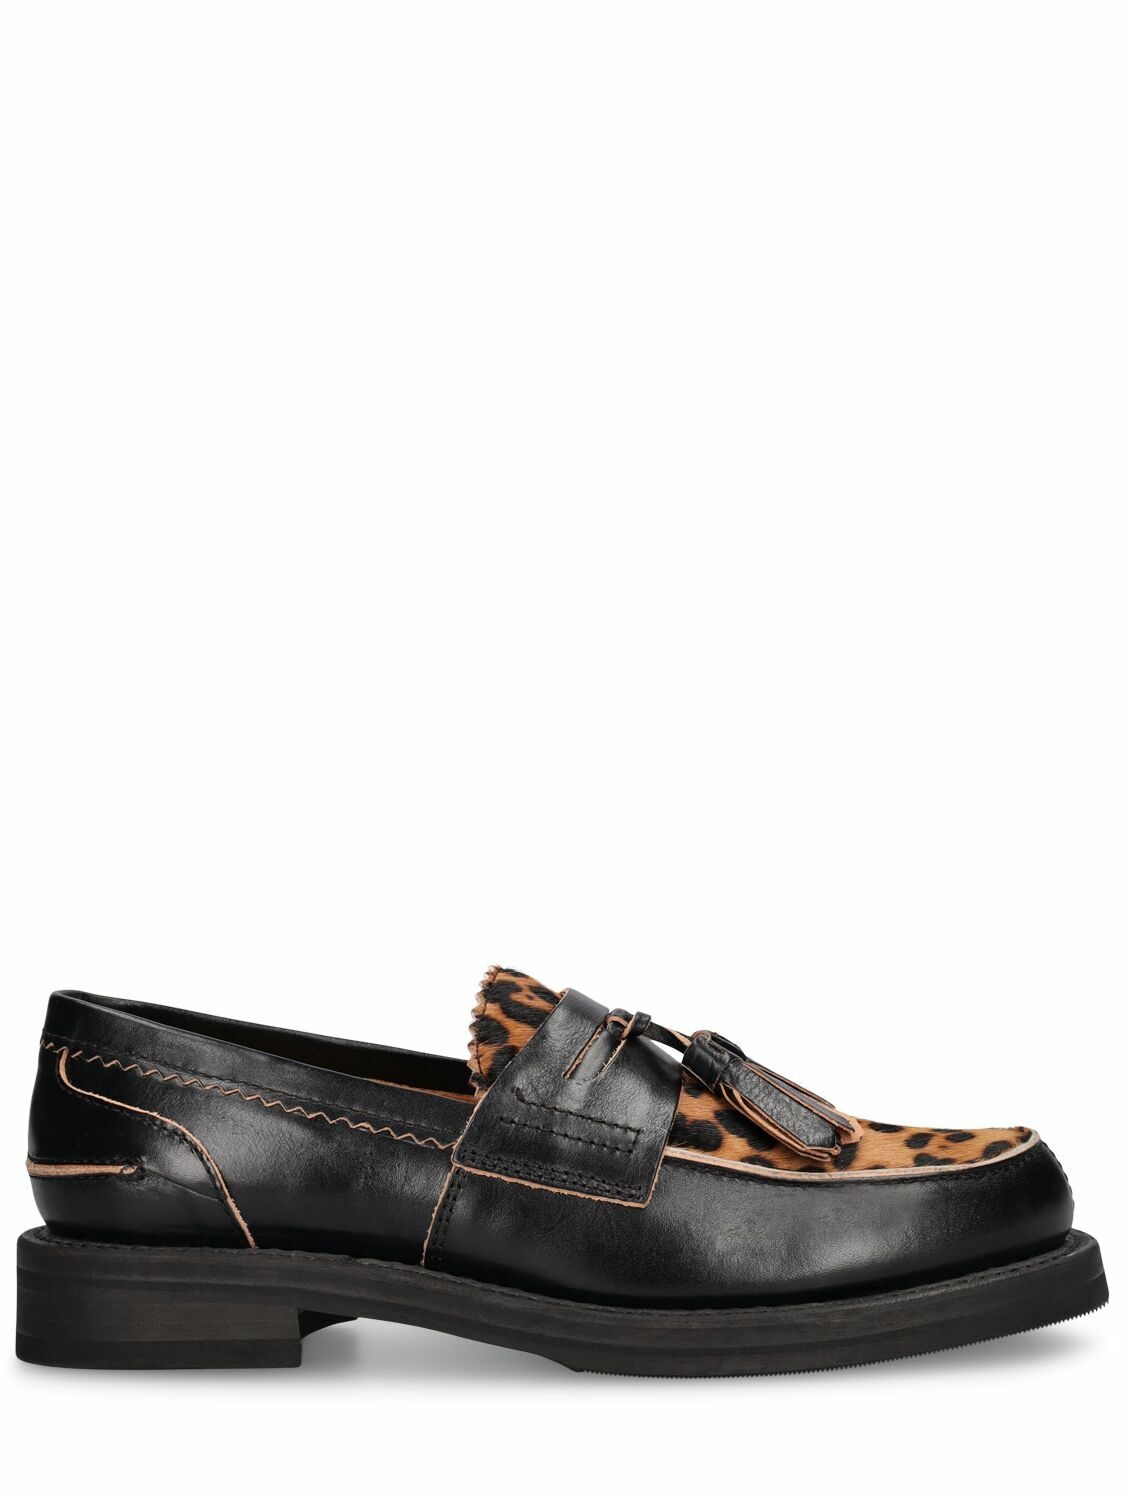 Photo: OUR LEGACY - Leather Tassel Loafers